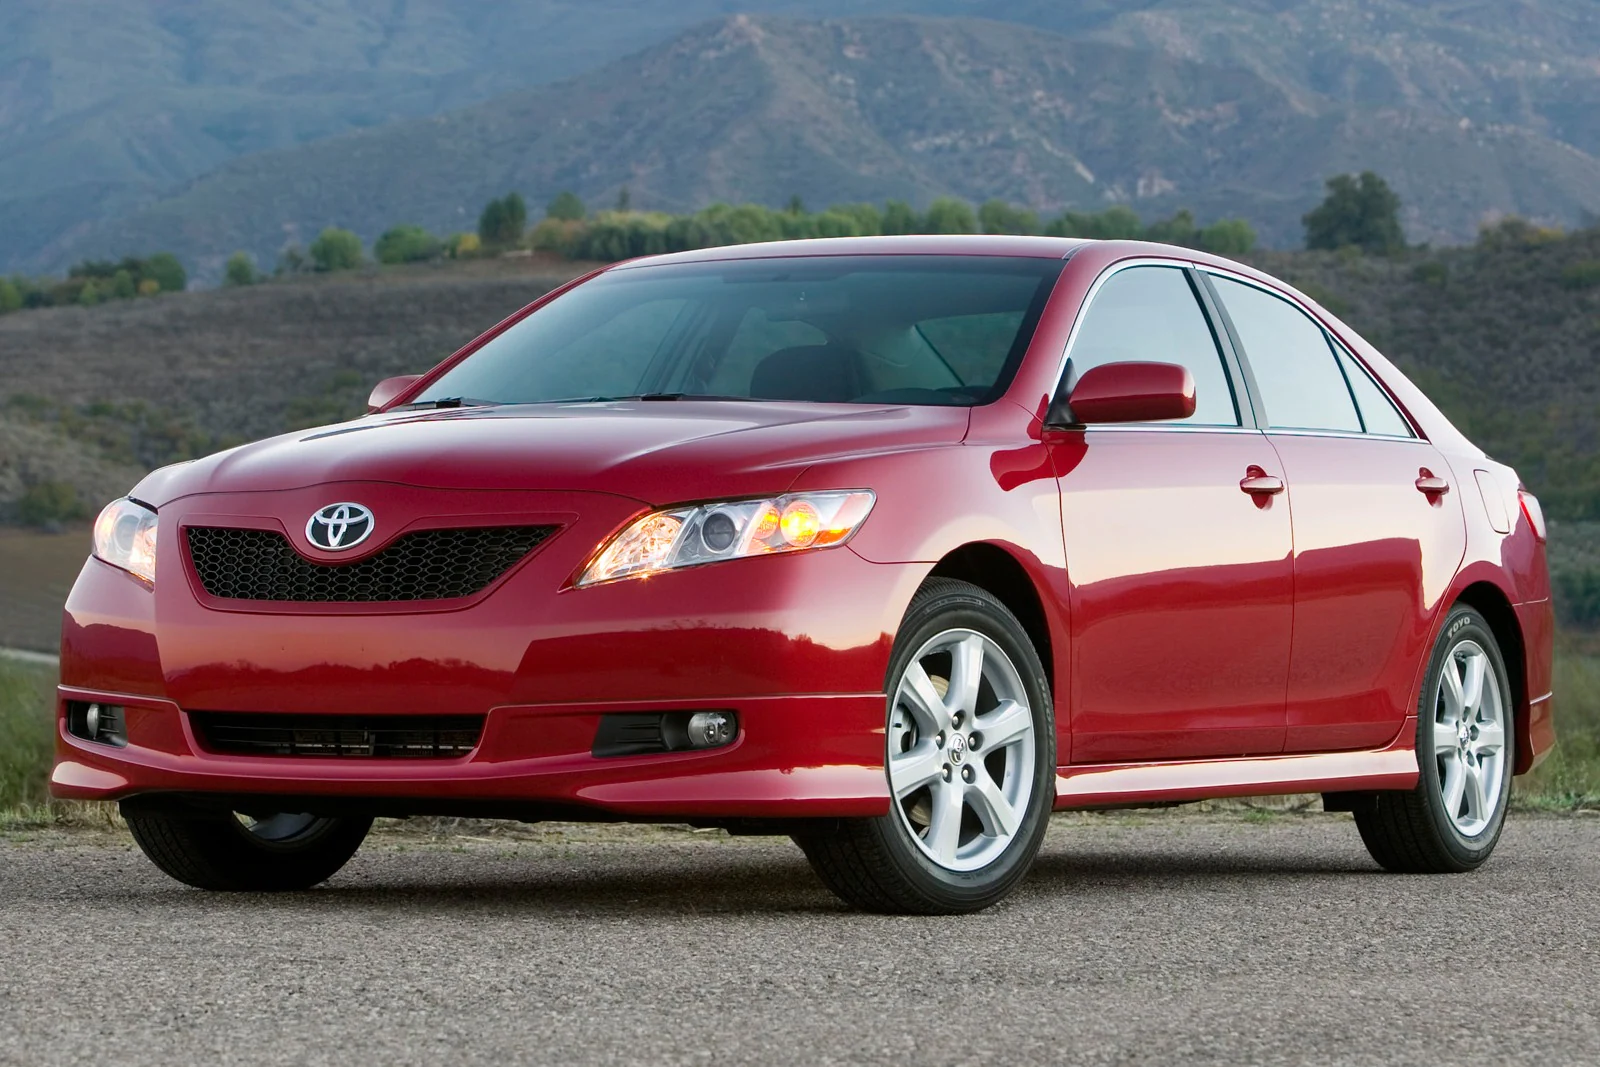 Toyota Camry (2007 – 2011): The Nigerian Nickname is Muscle 